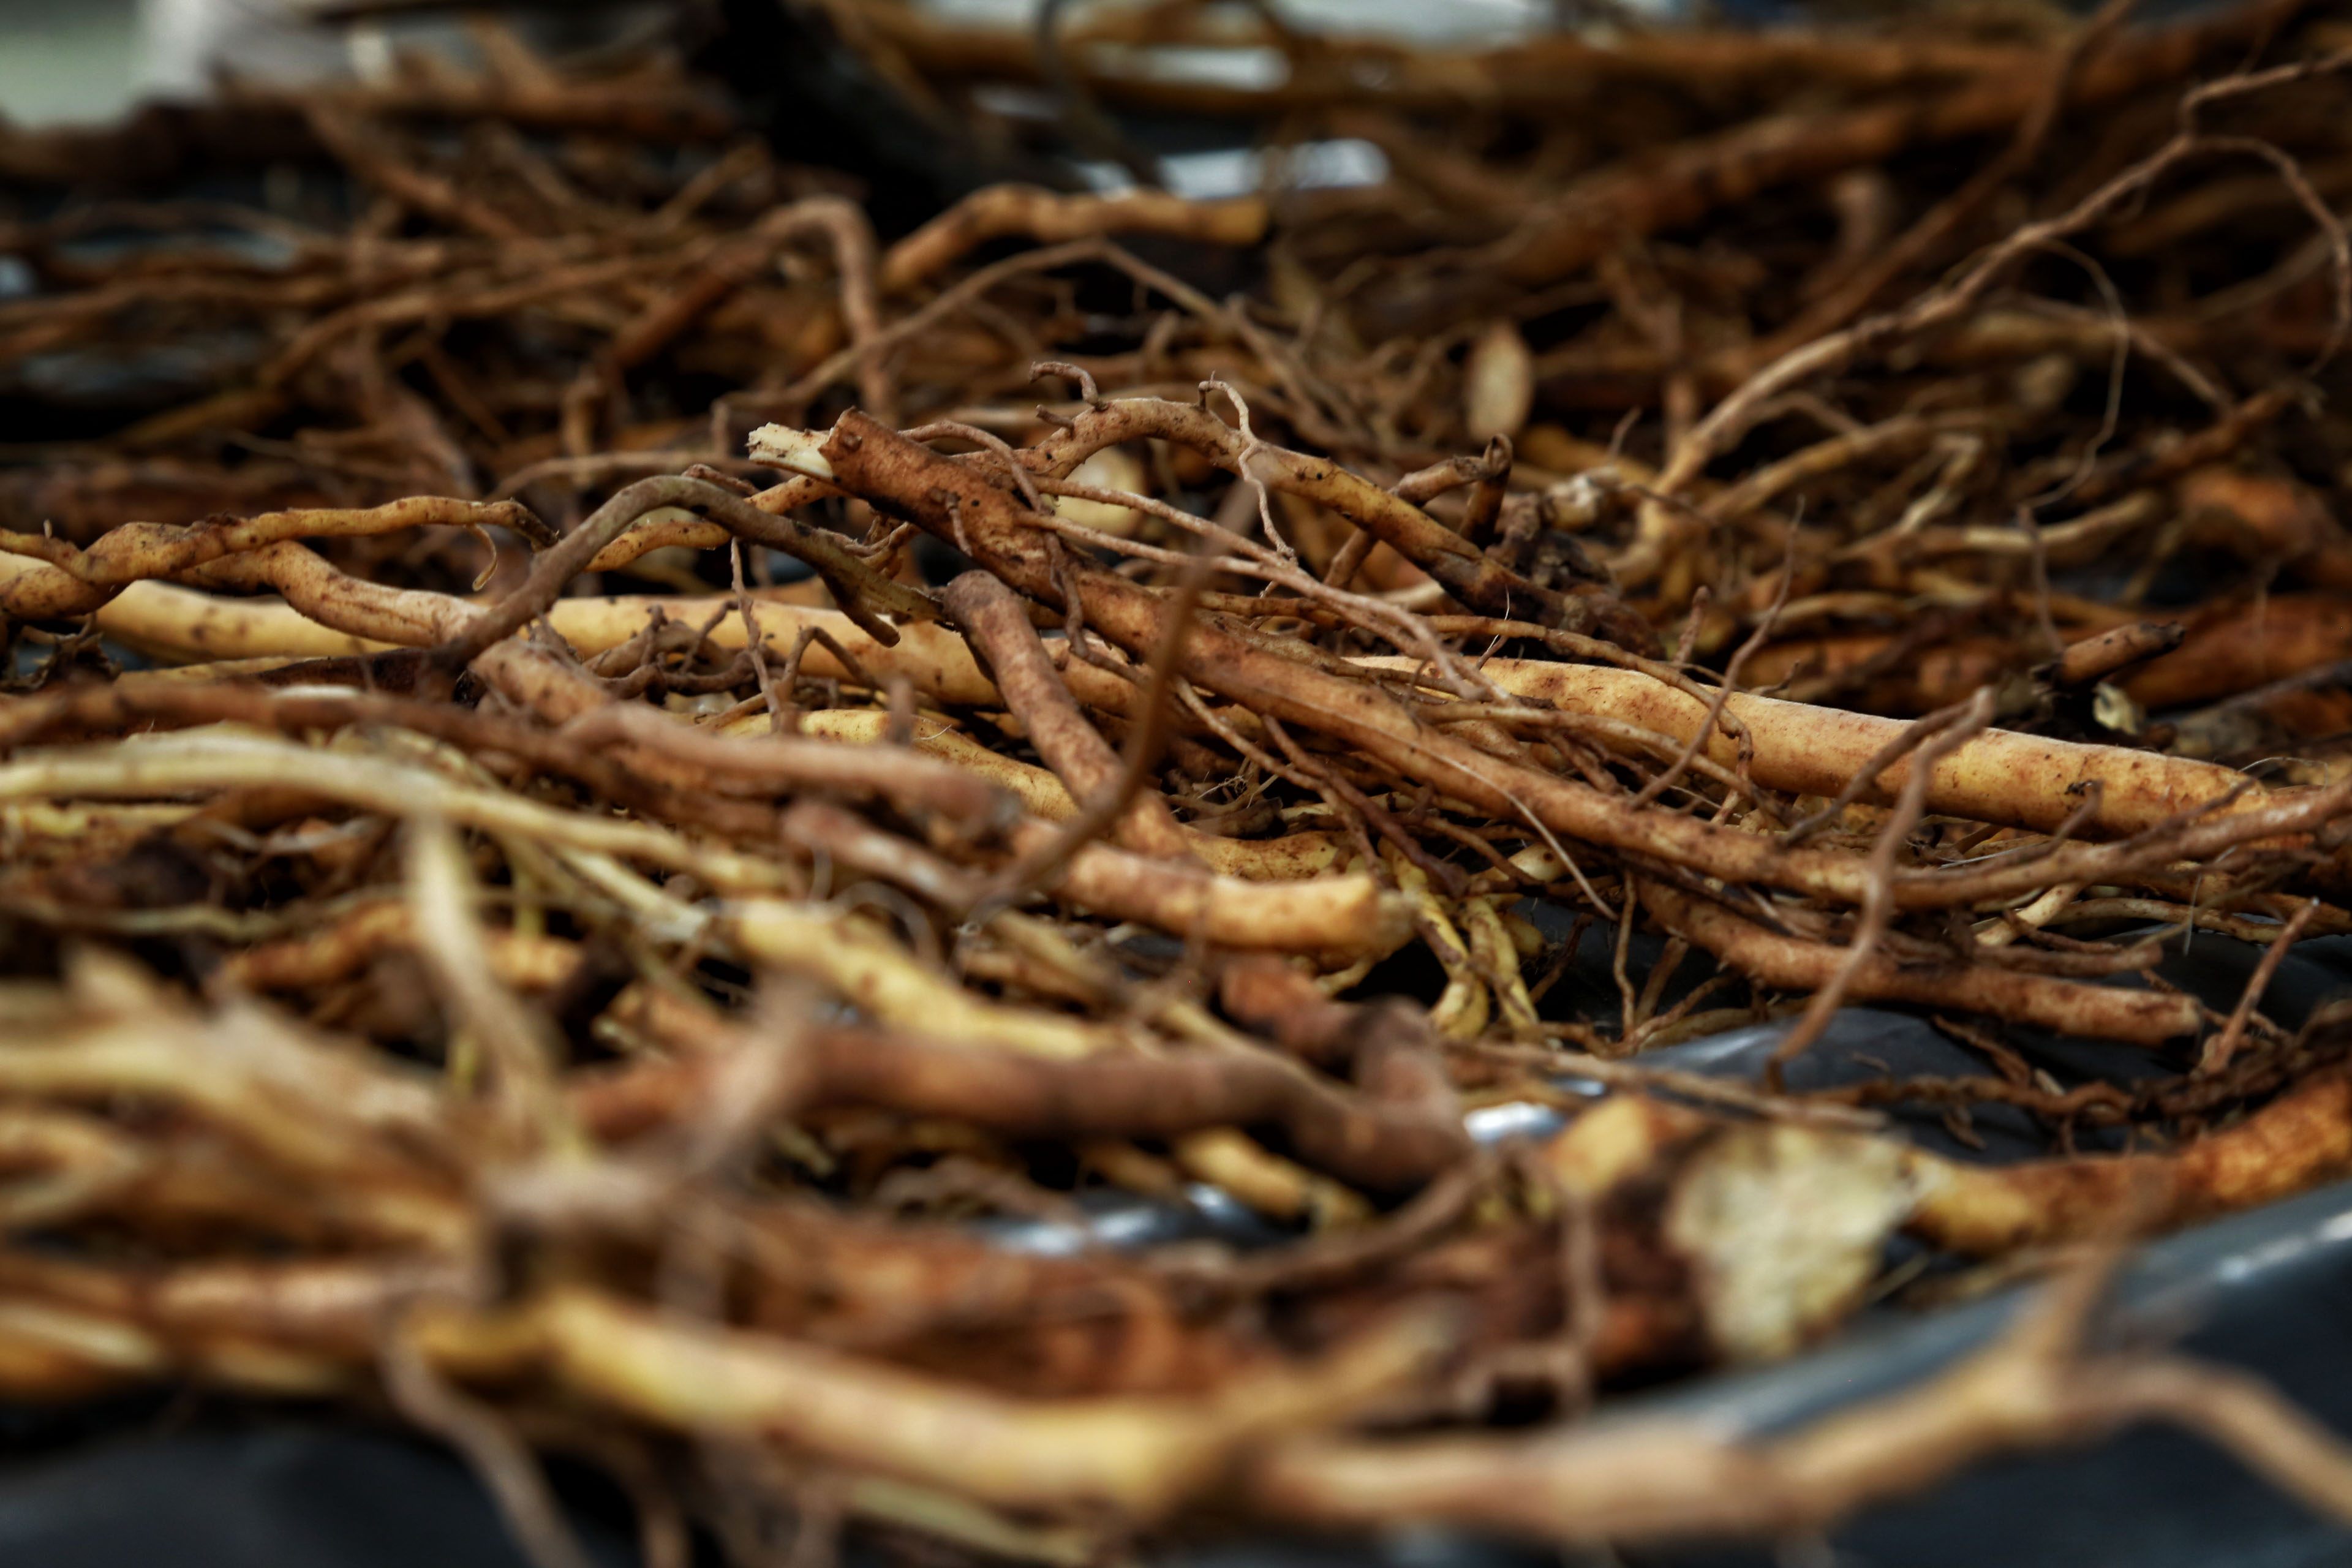 The roots of the kava plant contain compounds called kavalactones which are key to kava's calming effects.